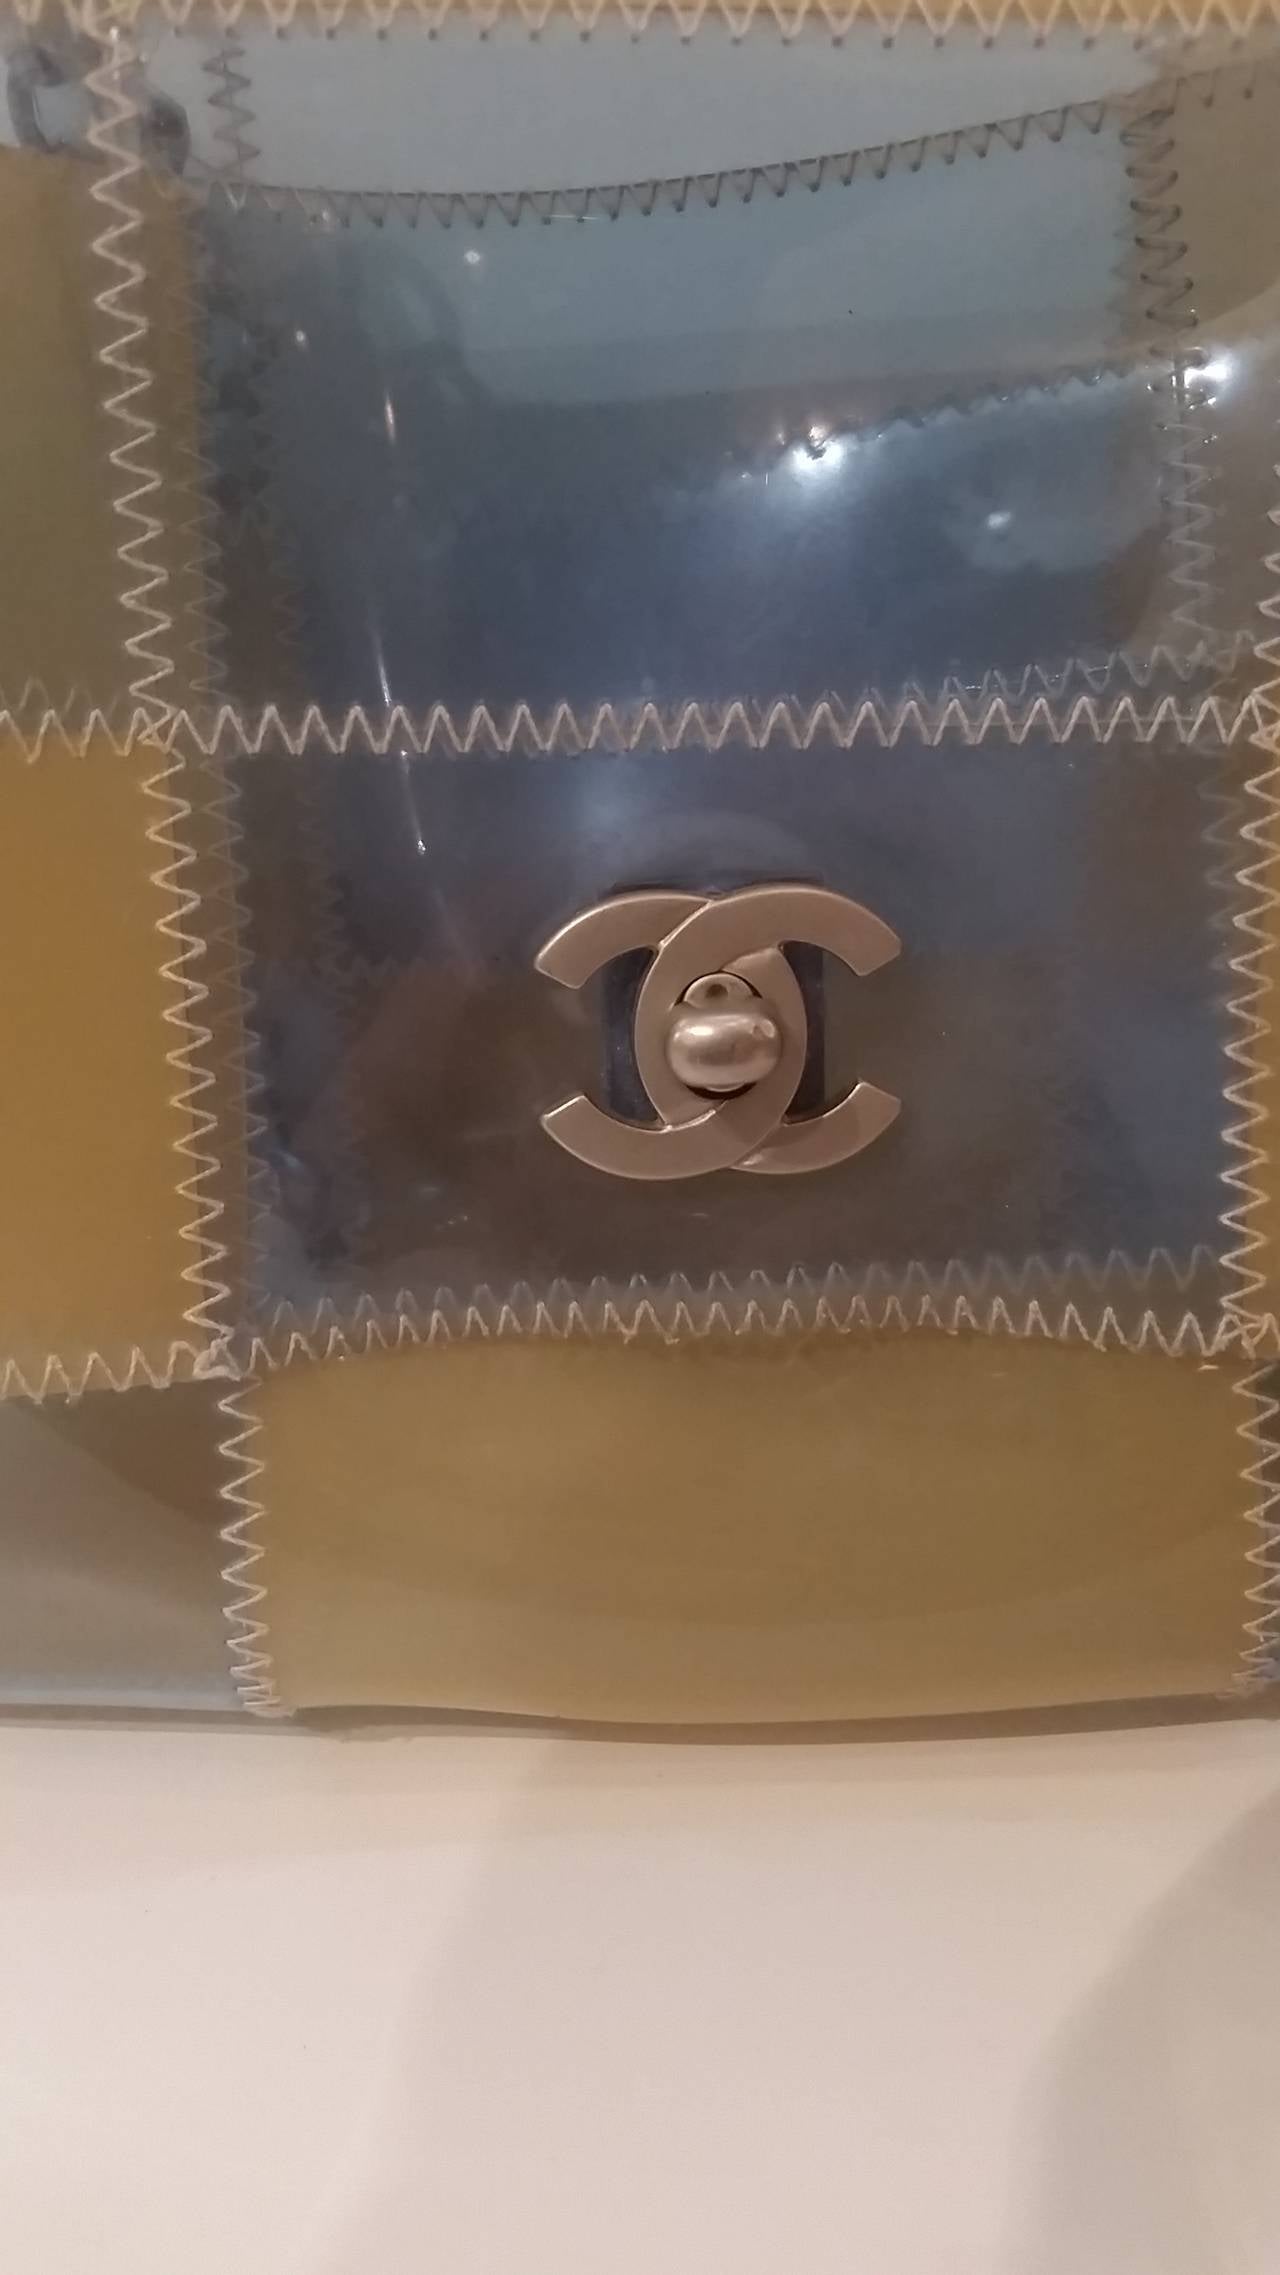 chanel jelly bag